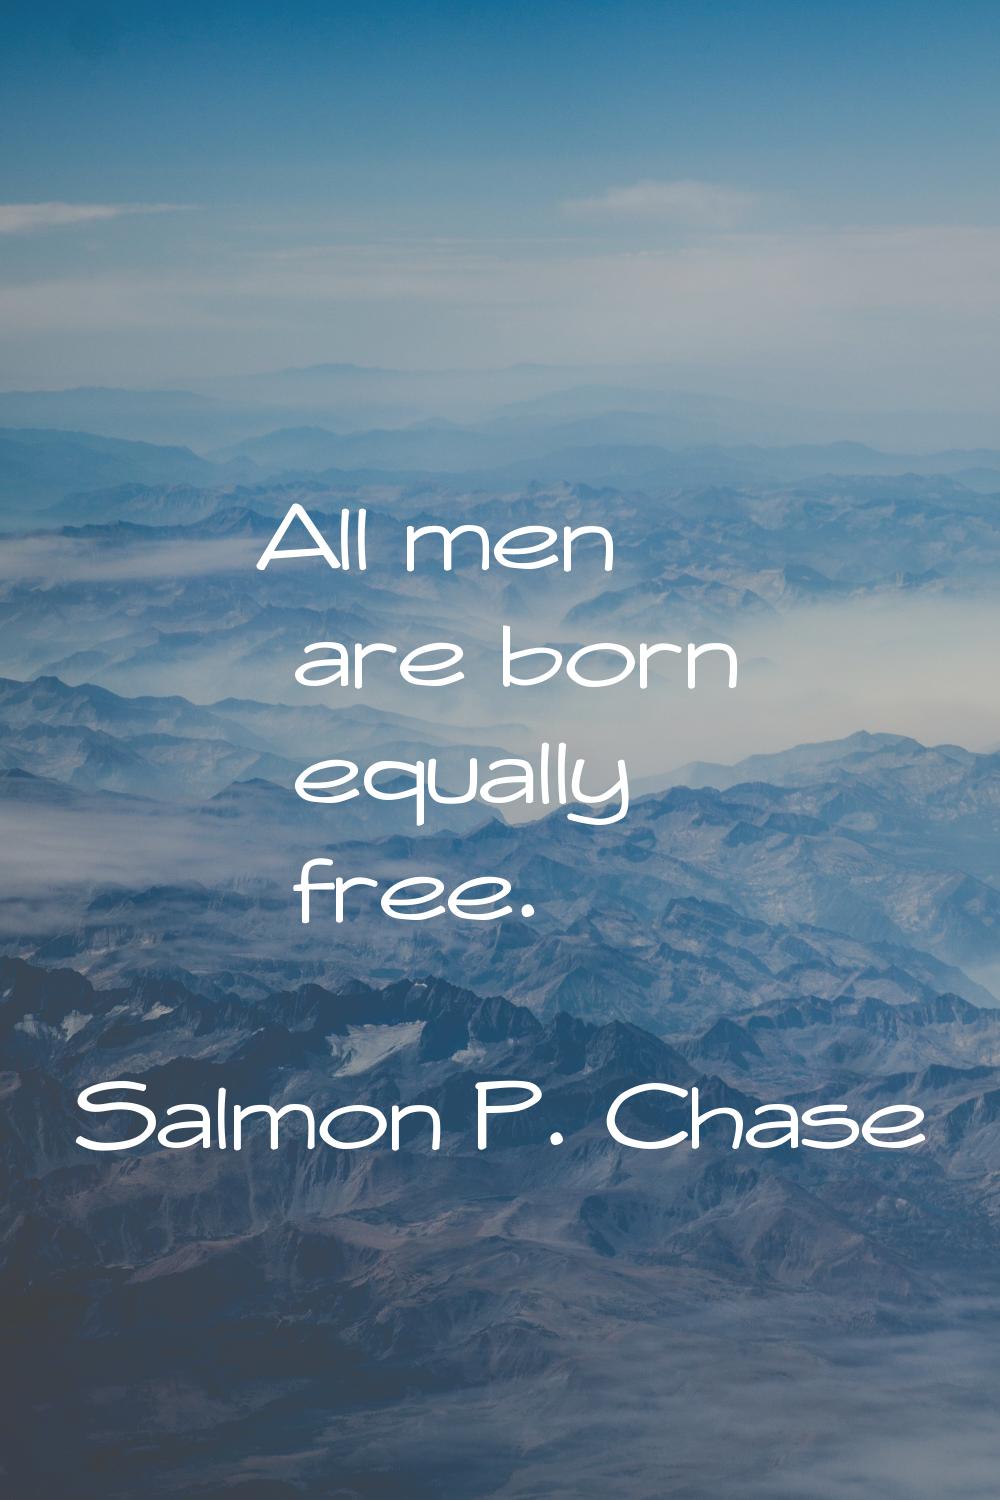 All men are born equally free.